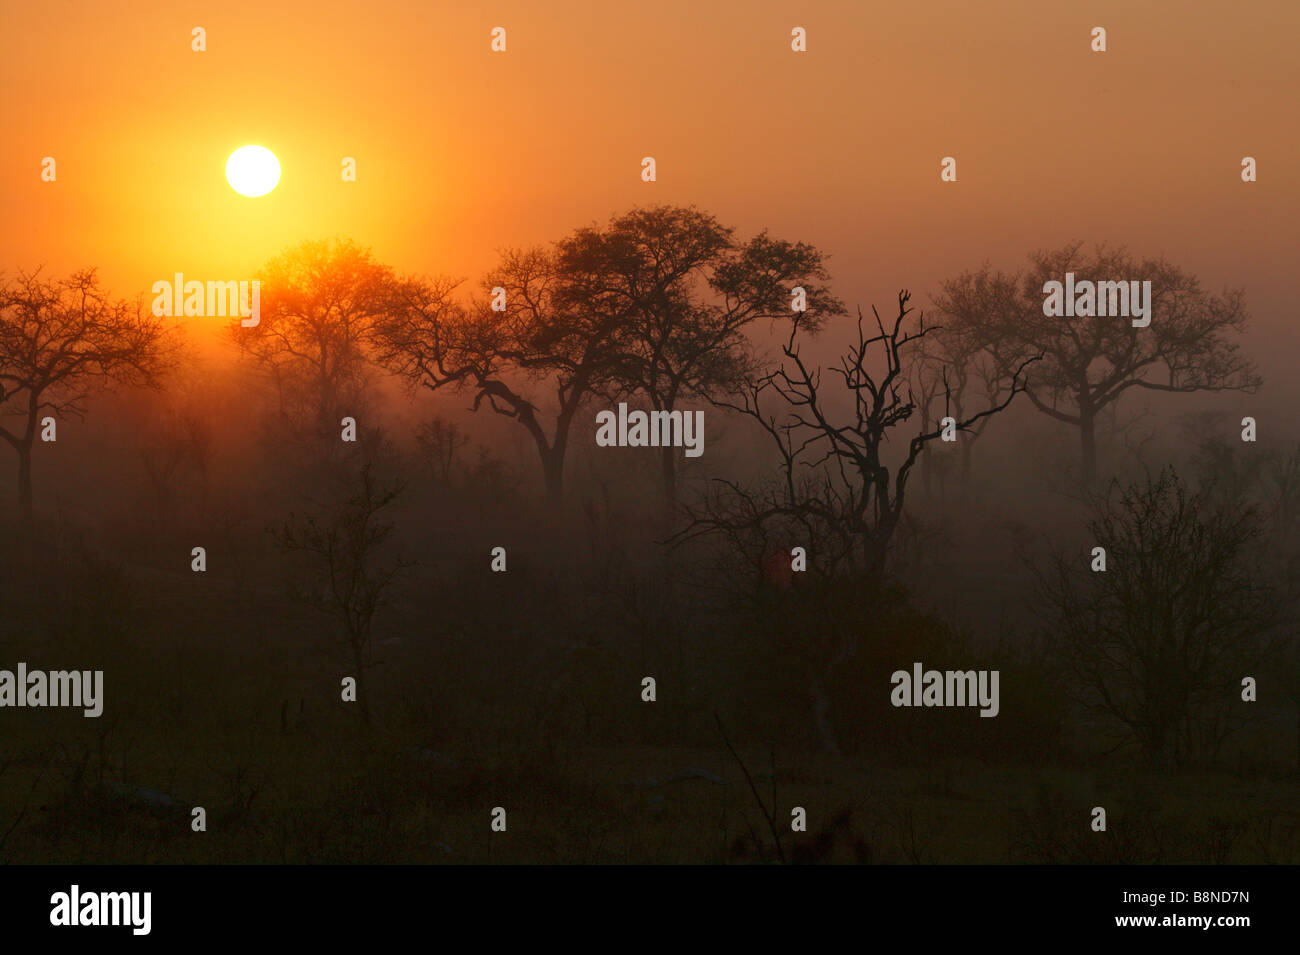 Morning silhouette of trees at dawn on a misty morning Stock Photo